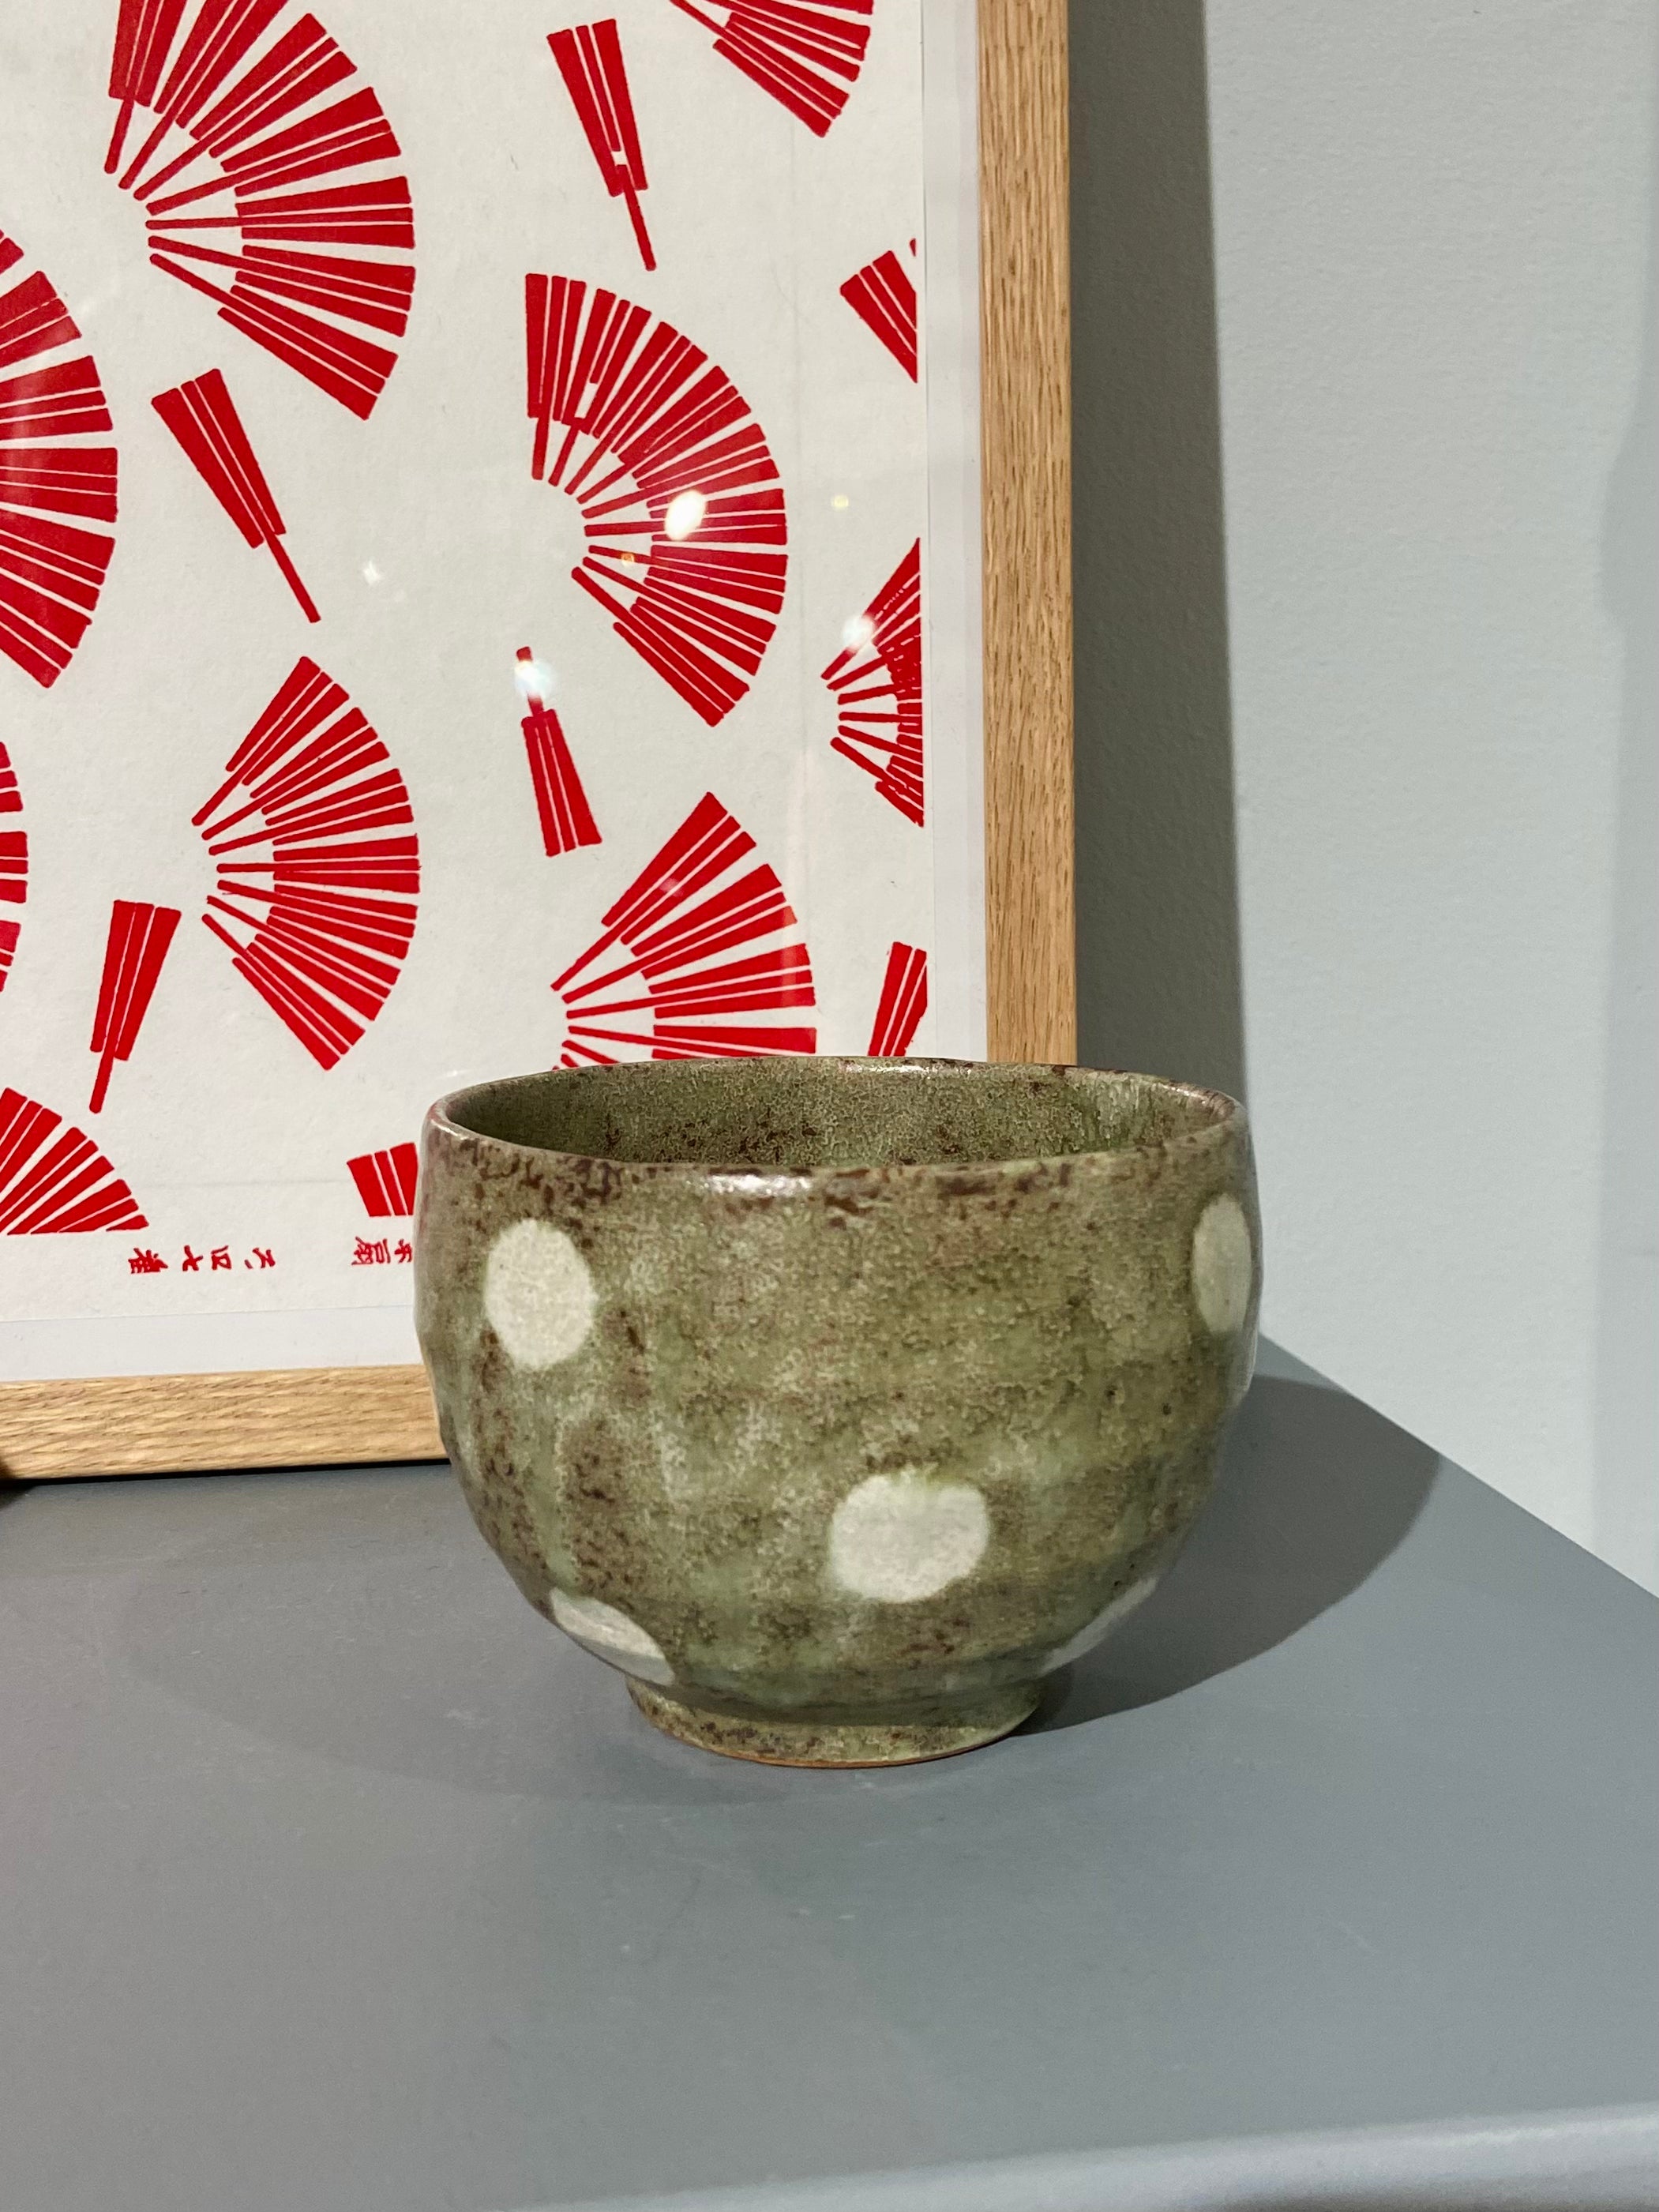 Ceramic cup with white dots